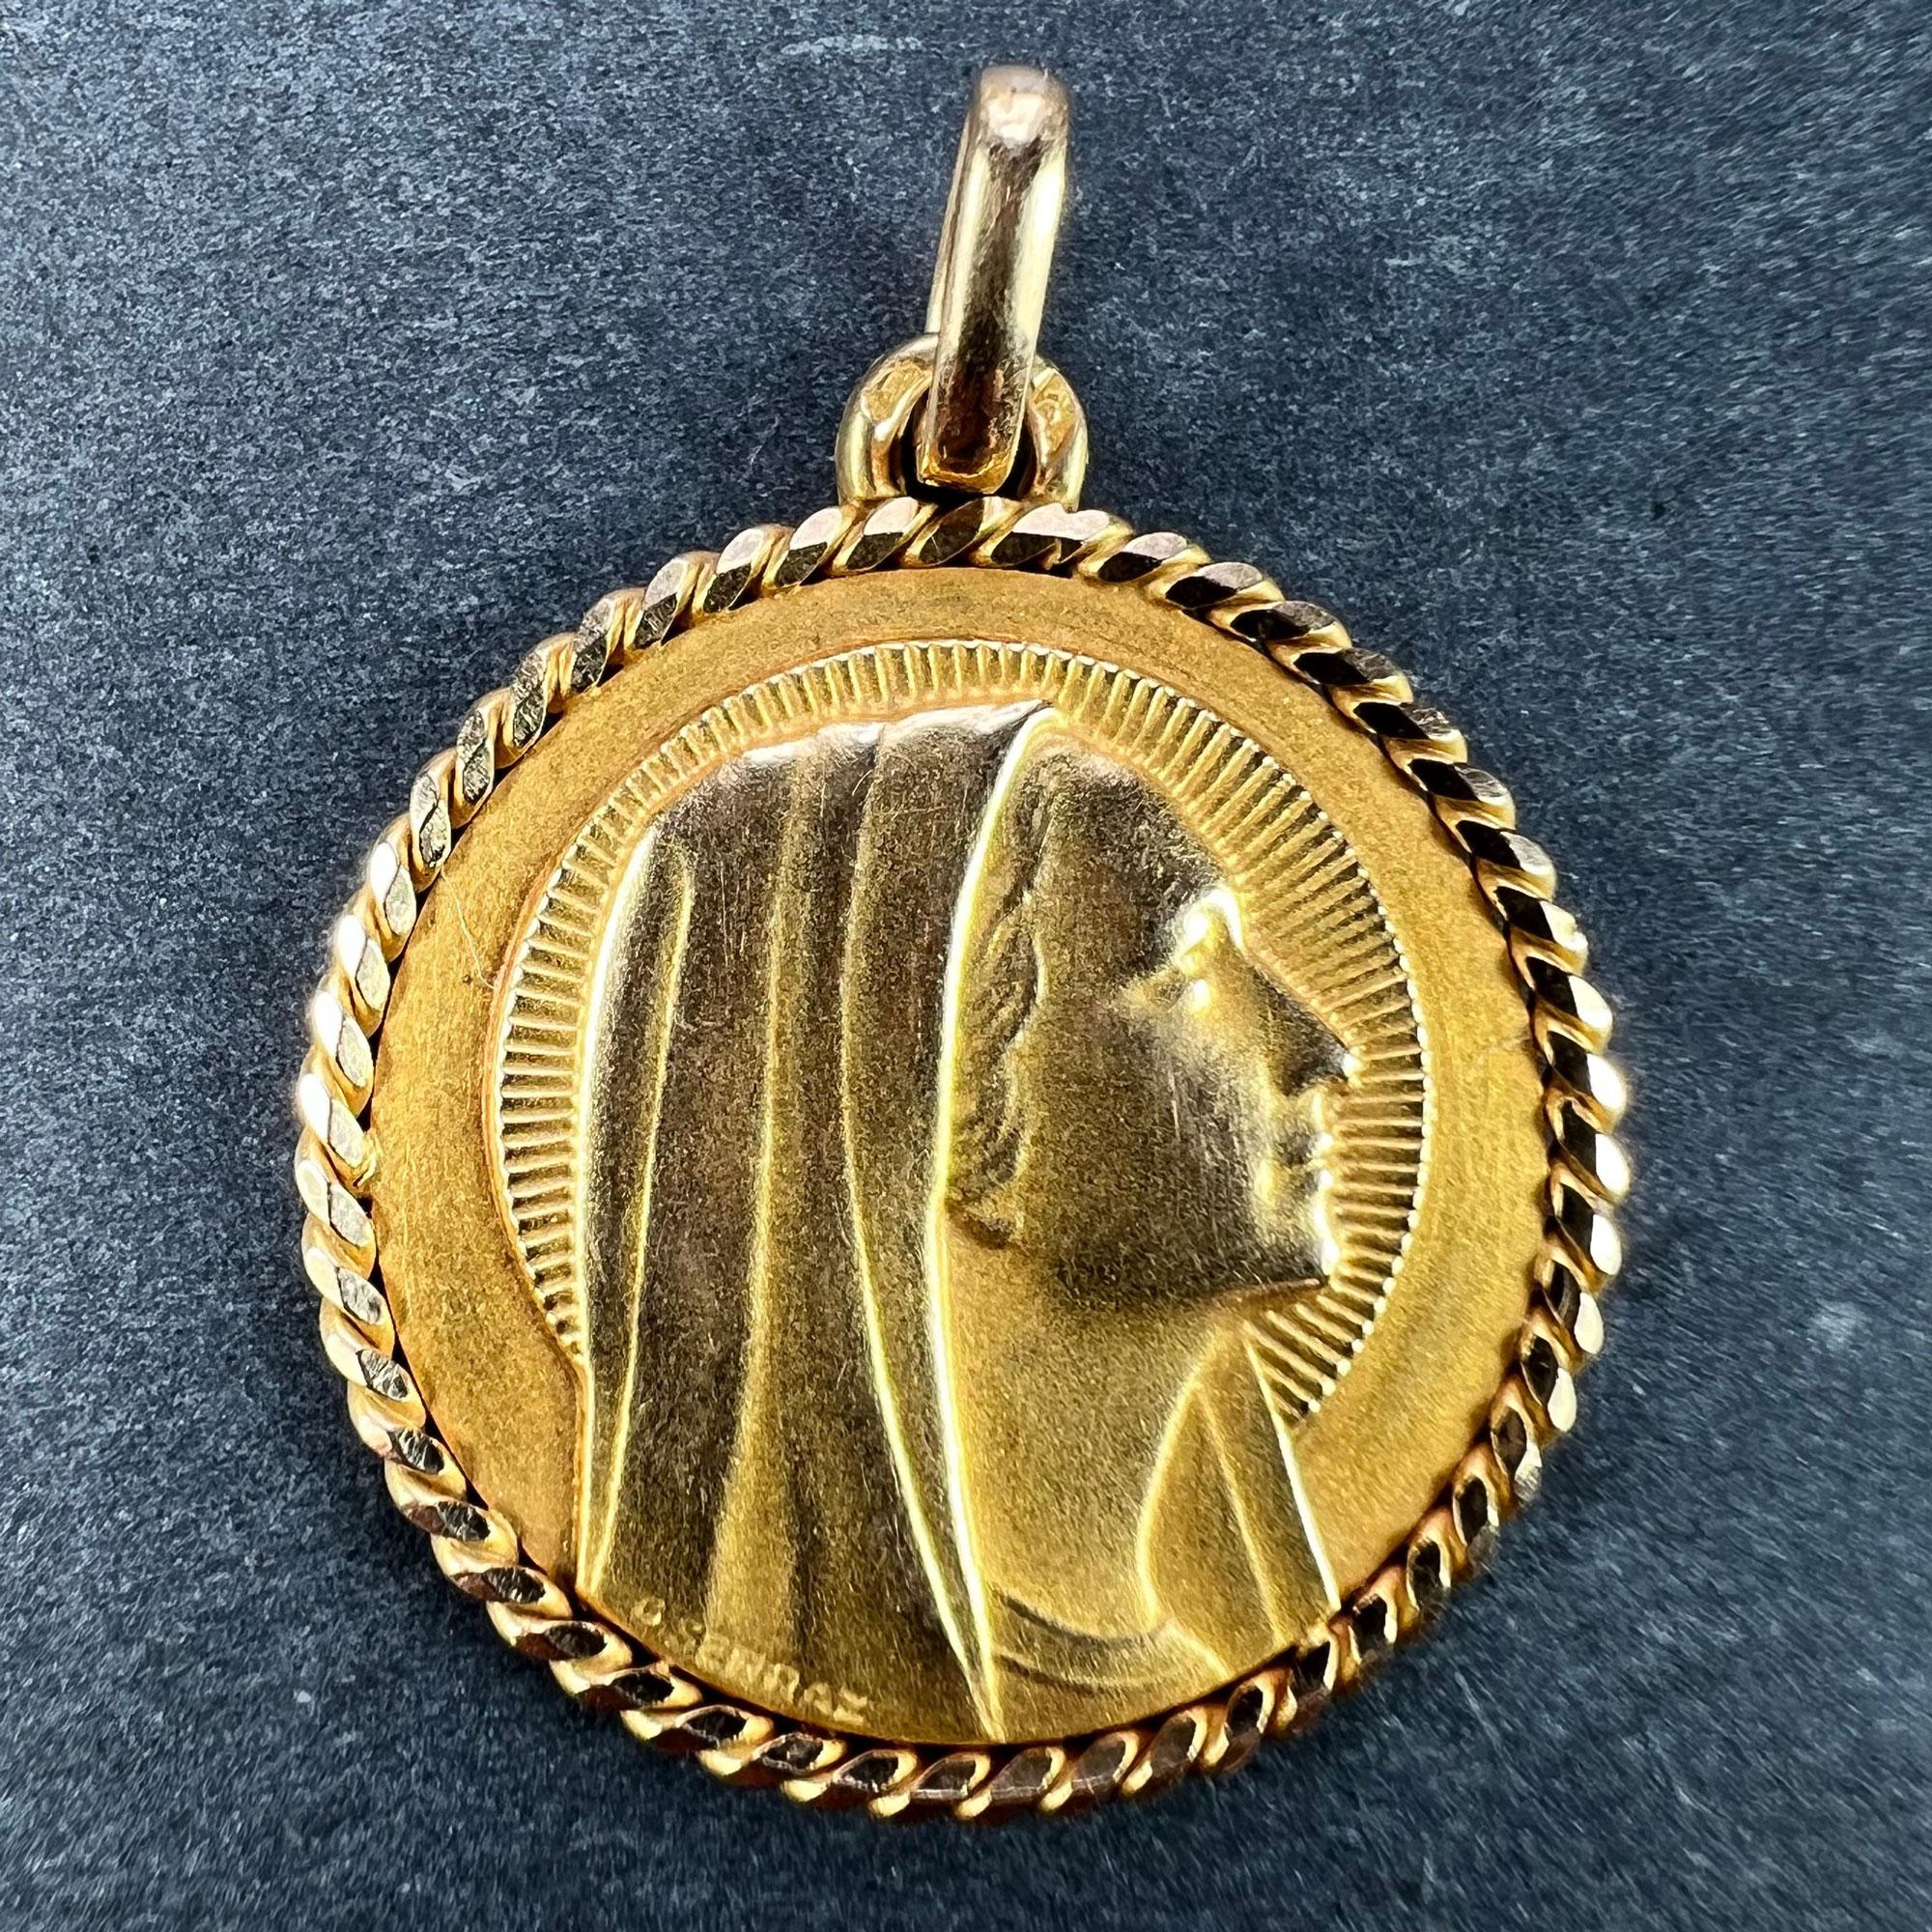 An 18 karat (18K) yellow gold pendant designed as a round medal depicting the Virgin Mary with a halo and a twisted rope surround. Signed G. Serraz. Stamped with the eagle’s head for French manufacture and 18 karat gold with an unknown maker's